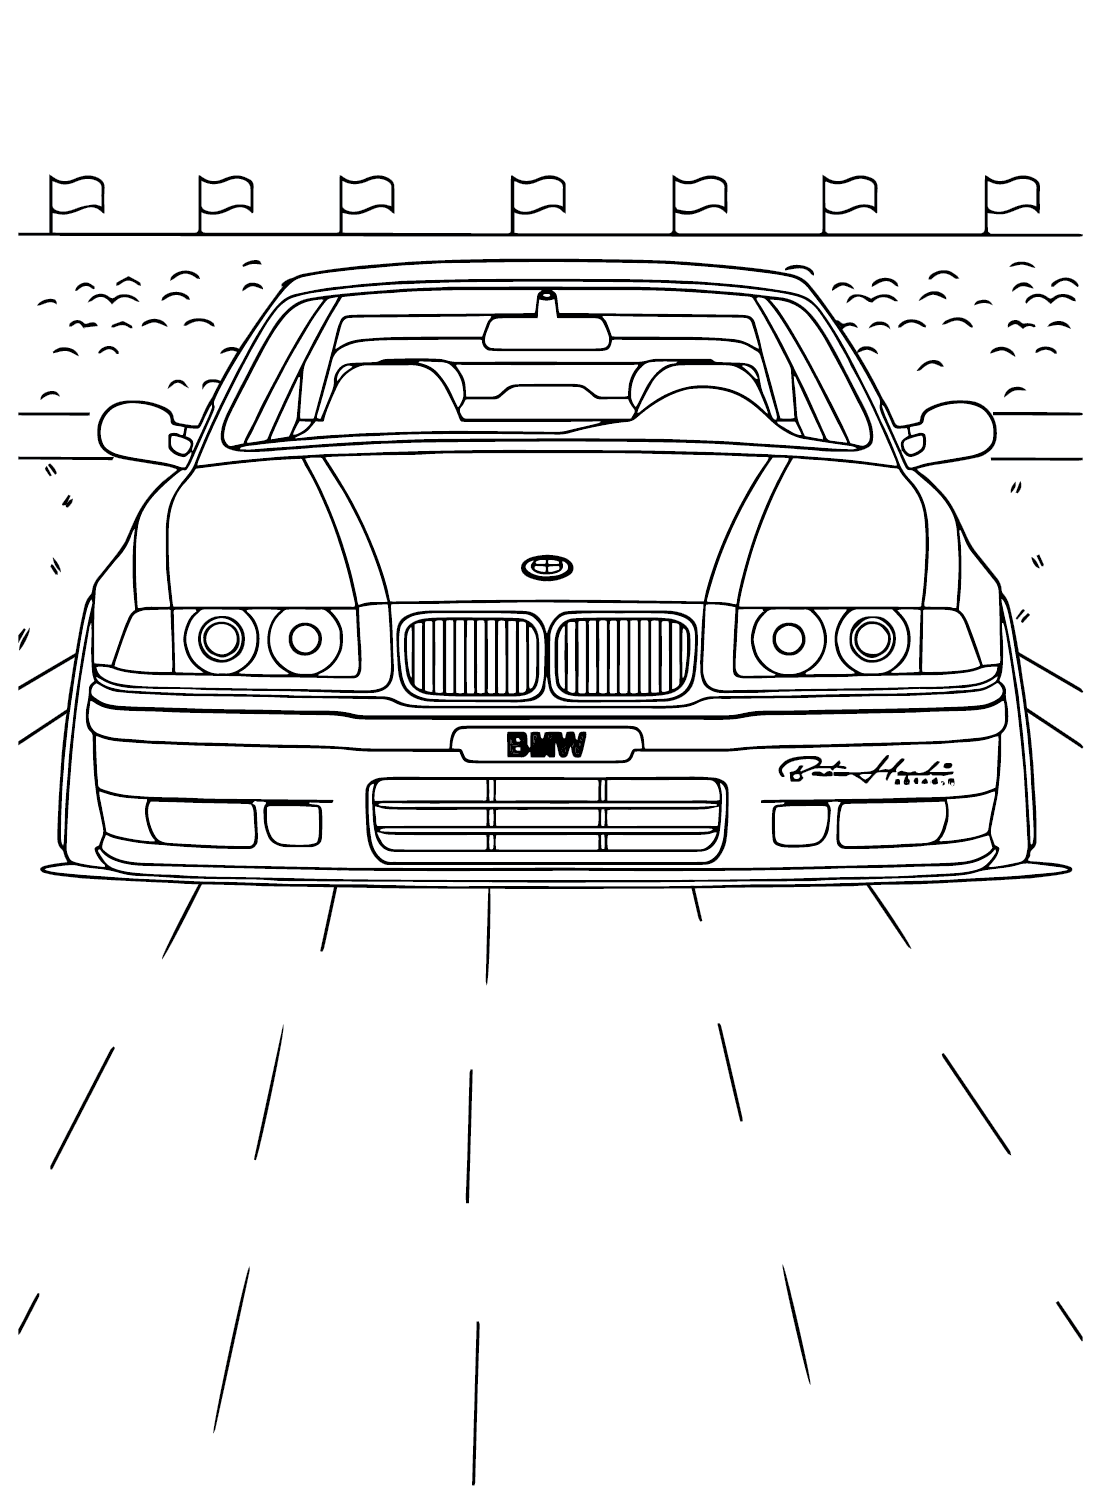 BMW Sports Beha Coloring Page from BMW